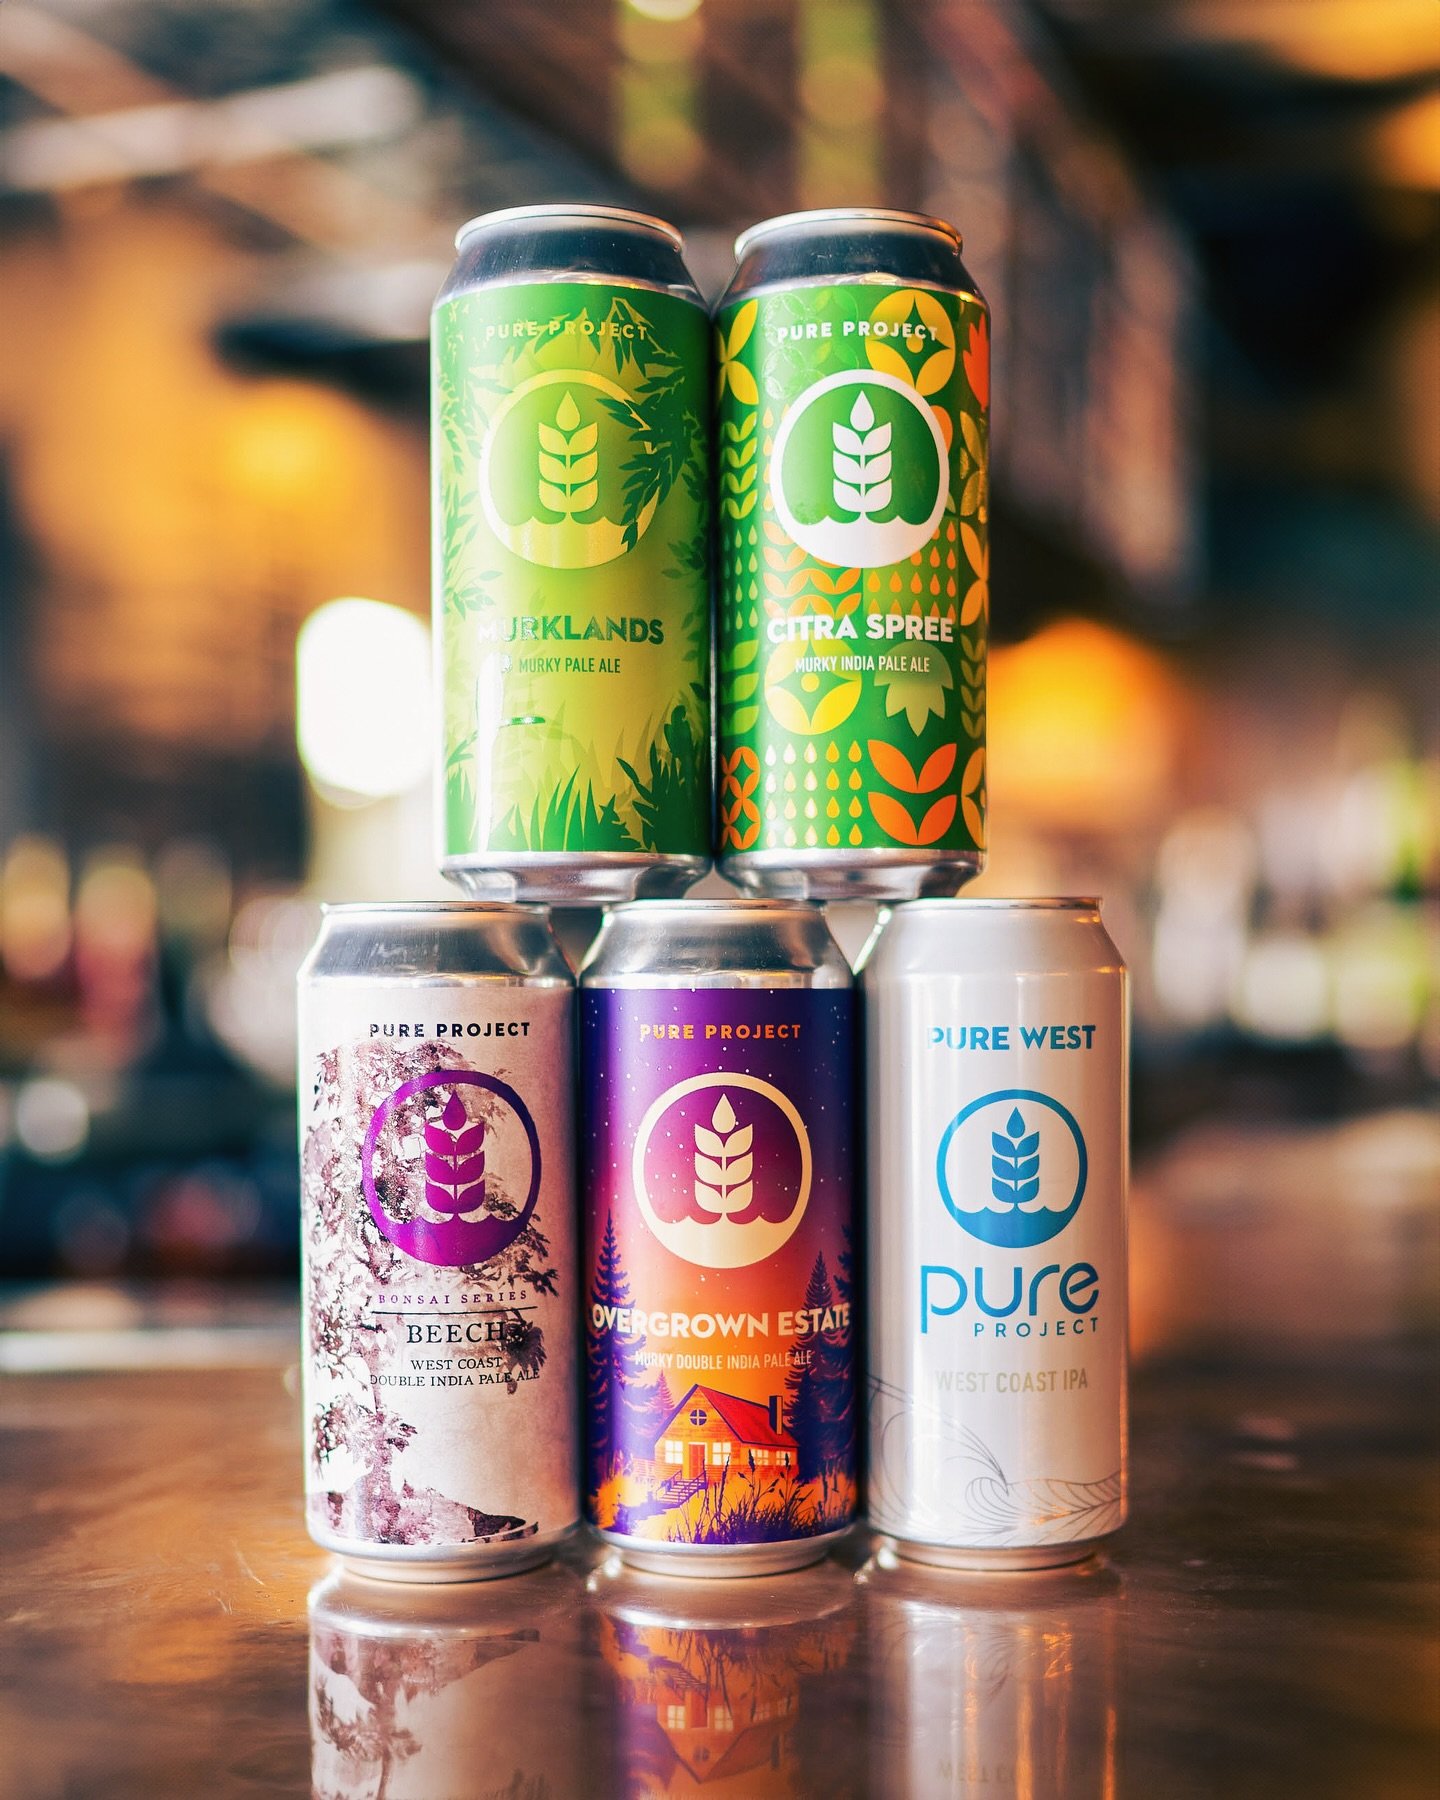 SATURDAYS ARE PURE BLISS WITH PURE PROJECT!

Today&rsquo;s our meet &amp; greet with our friends @purebrewing! Come hang with Jensen and us and talk everything beer. We&rsquo;ve got plenty of their great suds on tap to wet your whistle. The shenaniga